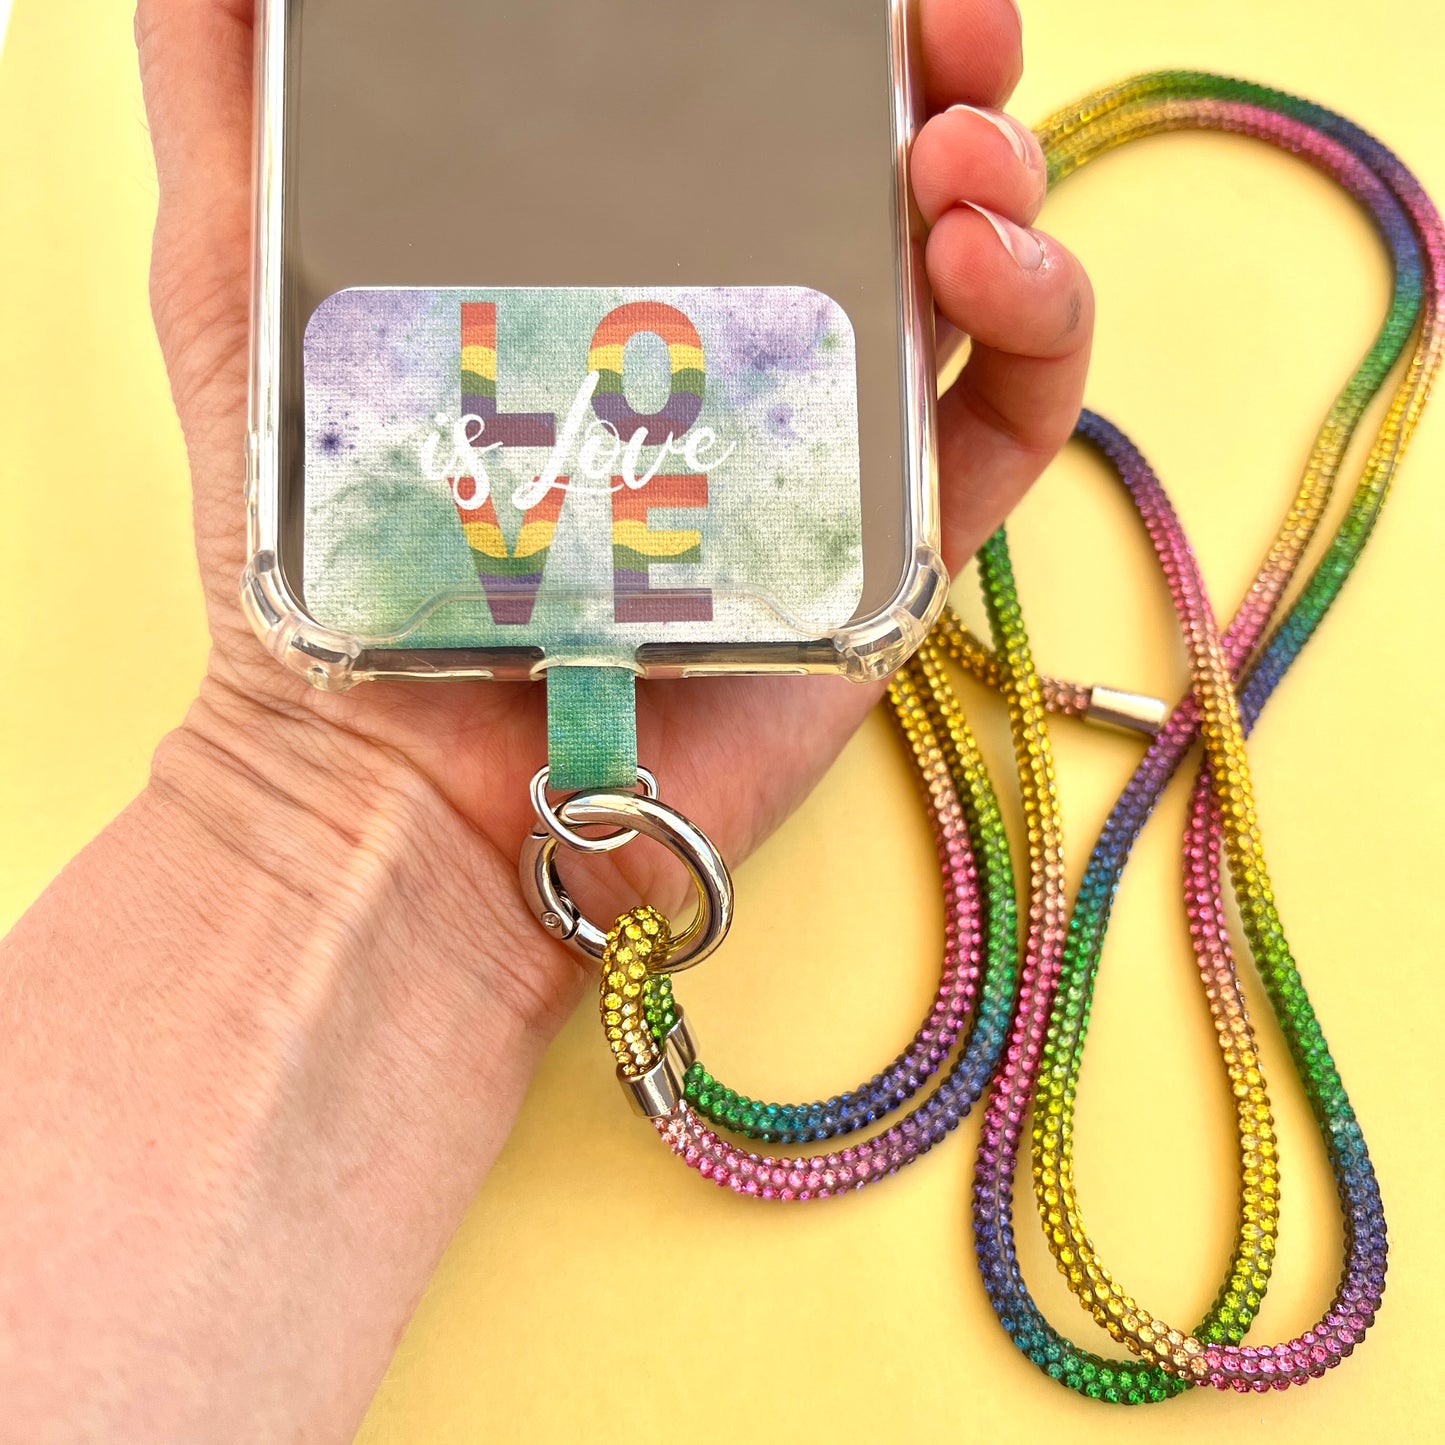 LOVE is LOVE - Special Edition - Phone Lanyard